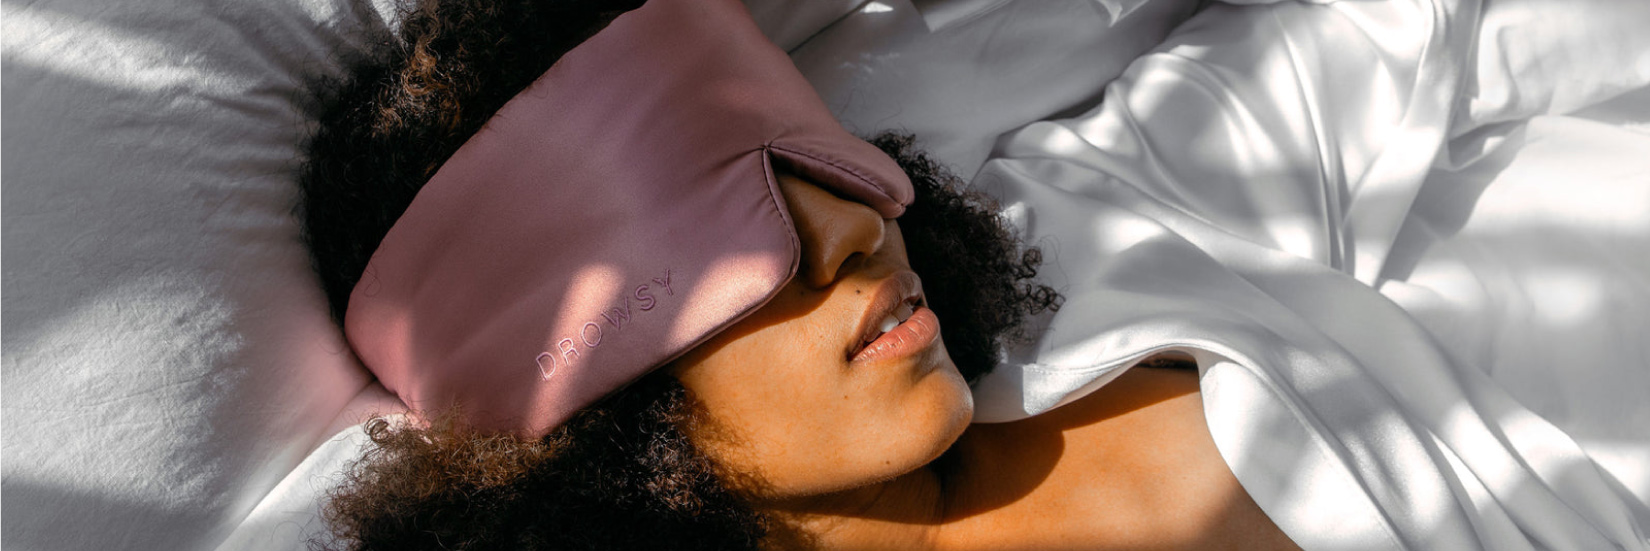 Woman Sleeping On White Sheets With Drowsy Silk Eye Mask